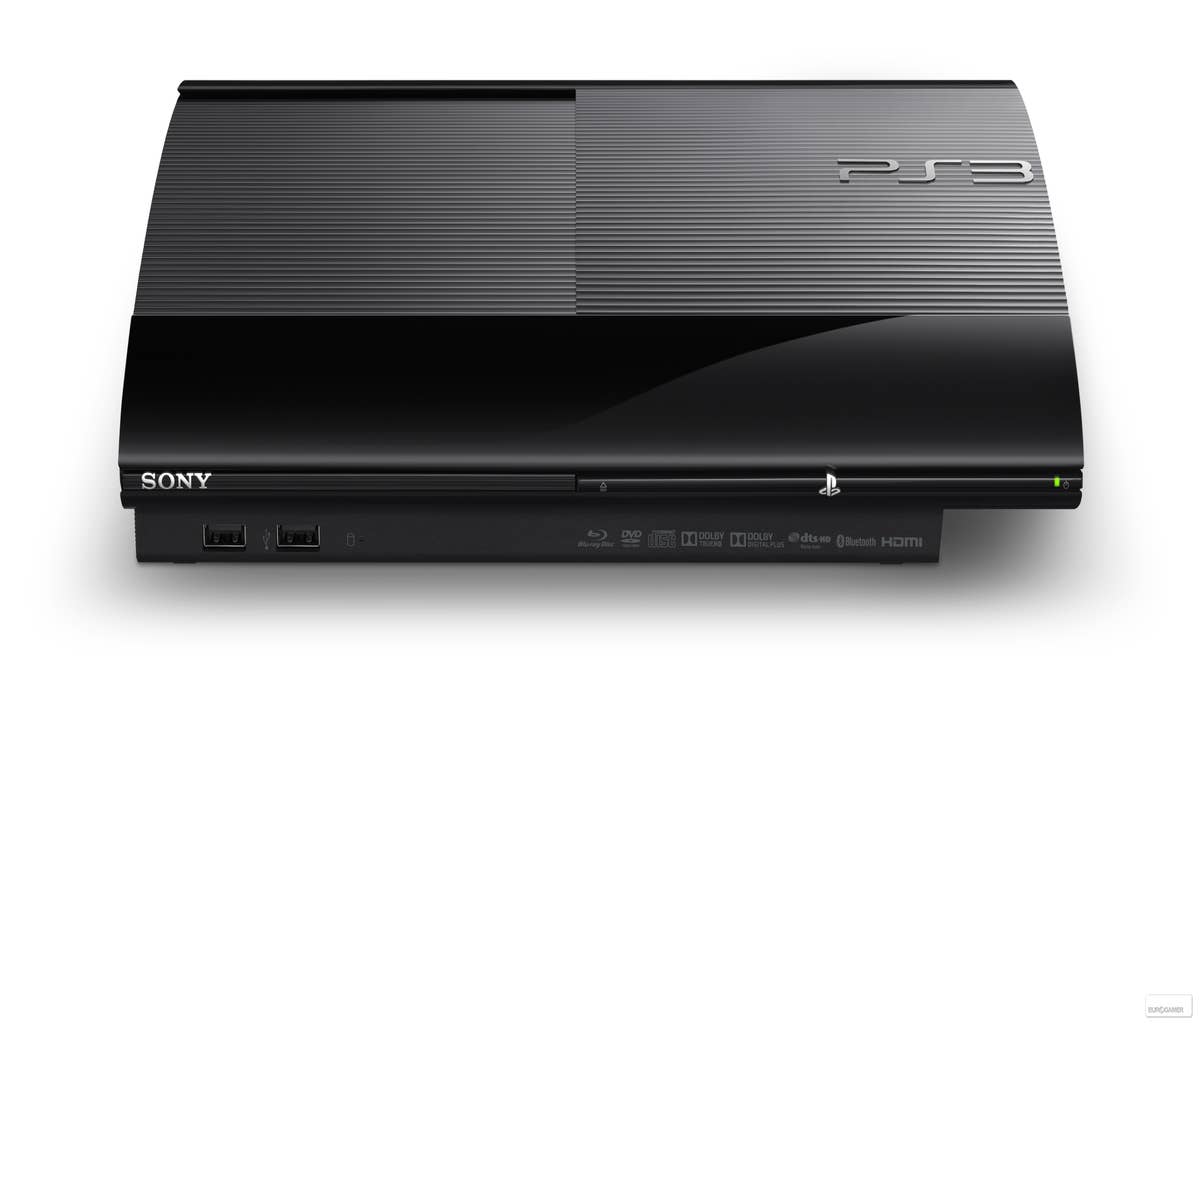 Sony Playstation 3 Review